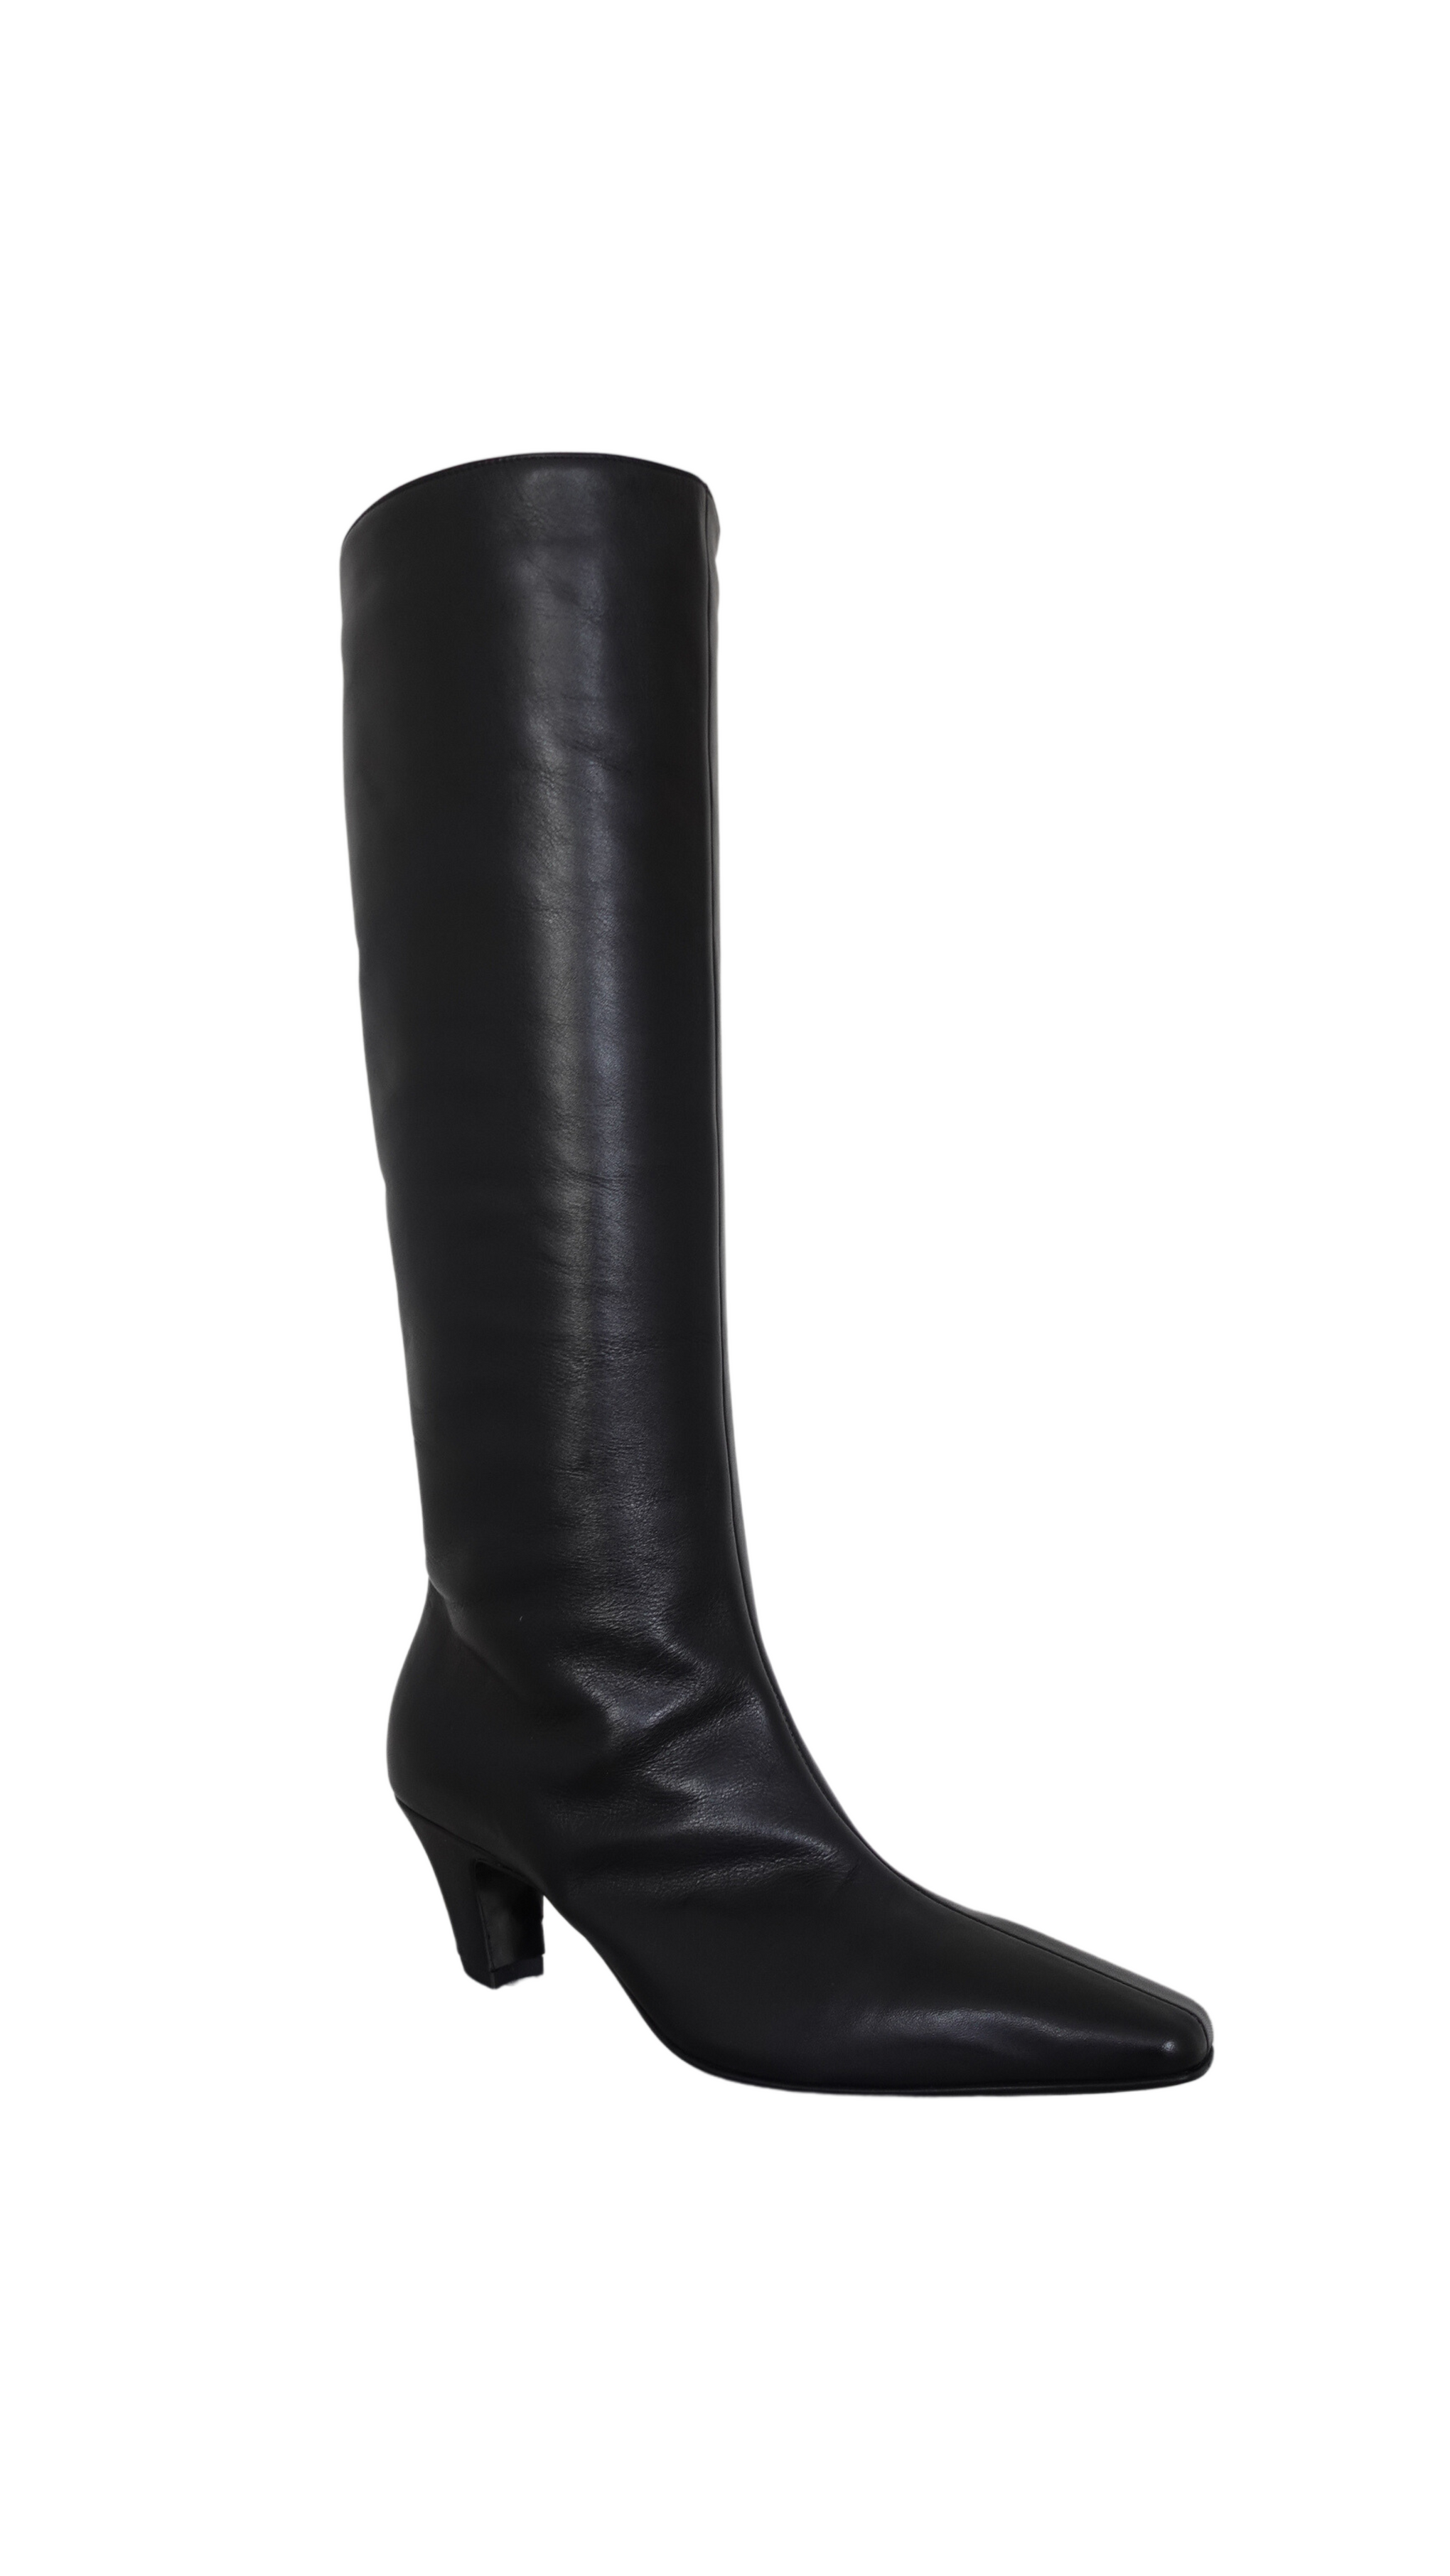 Bare Base Tall Boot in Black available at TNT The New Trend Australia